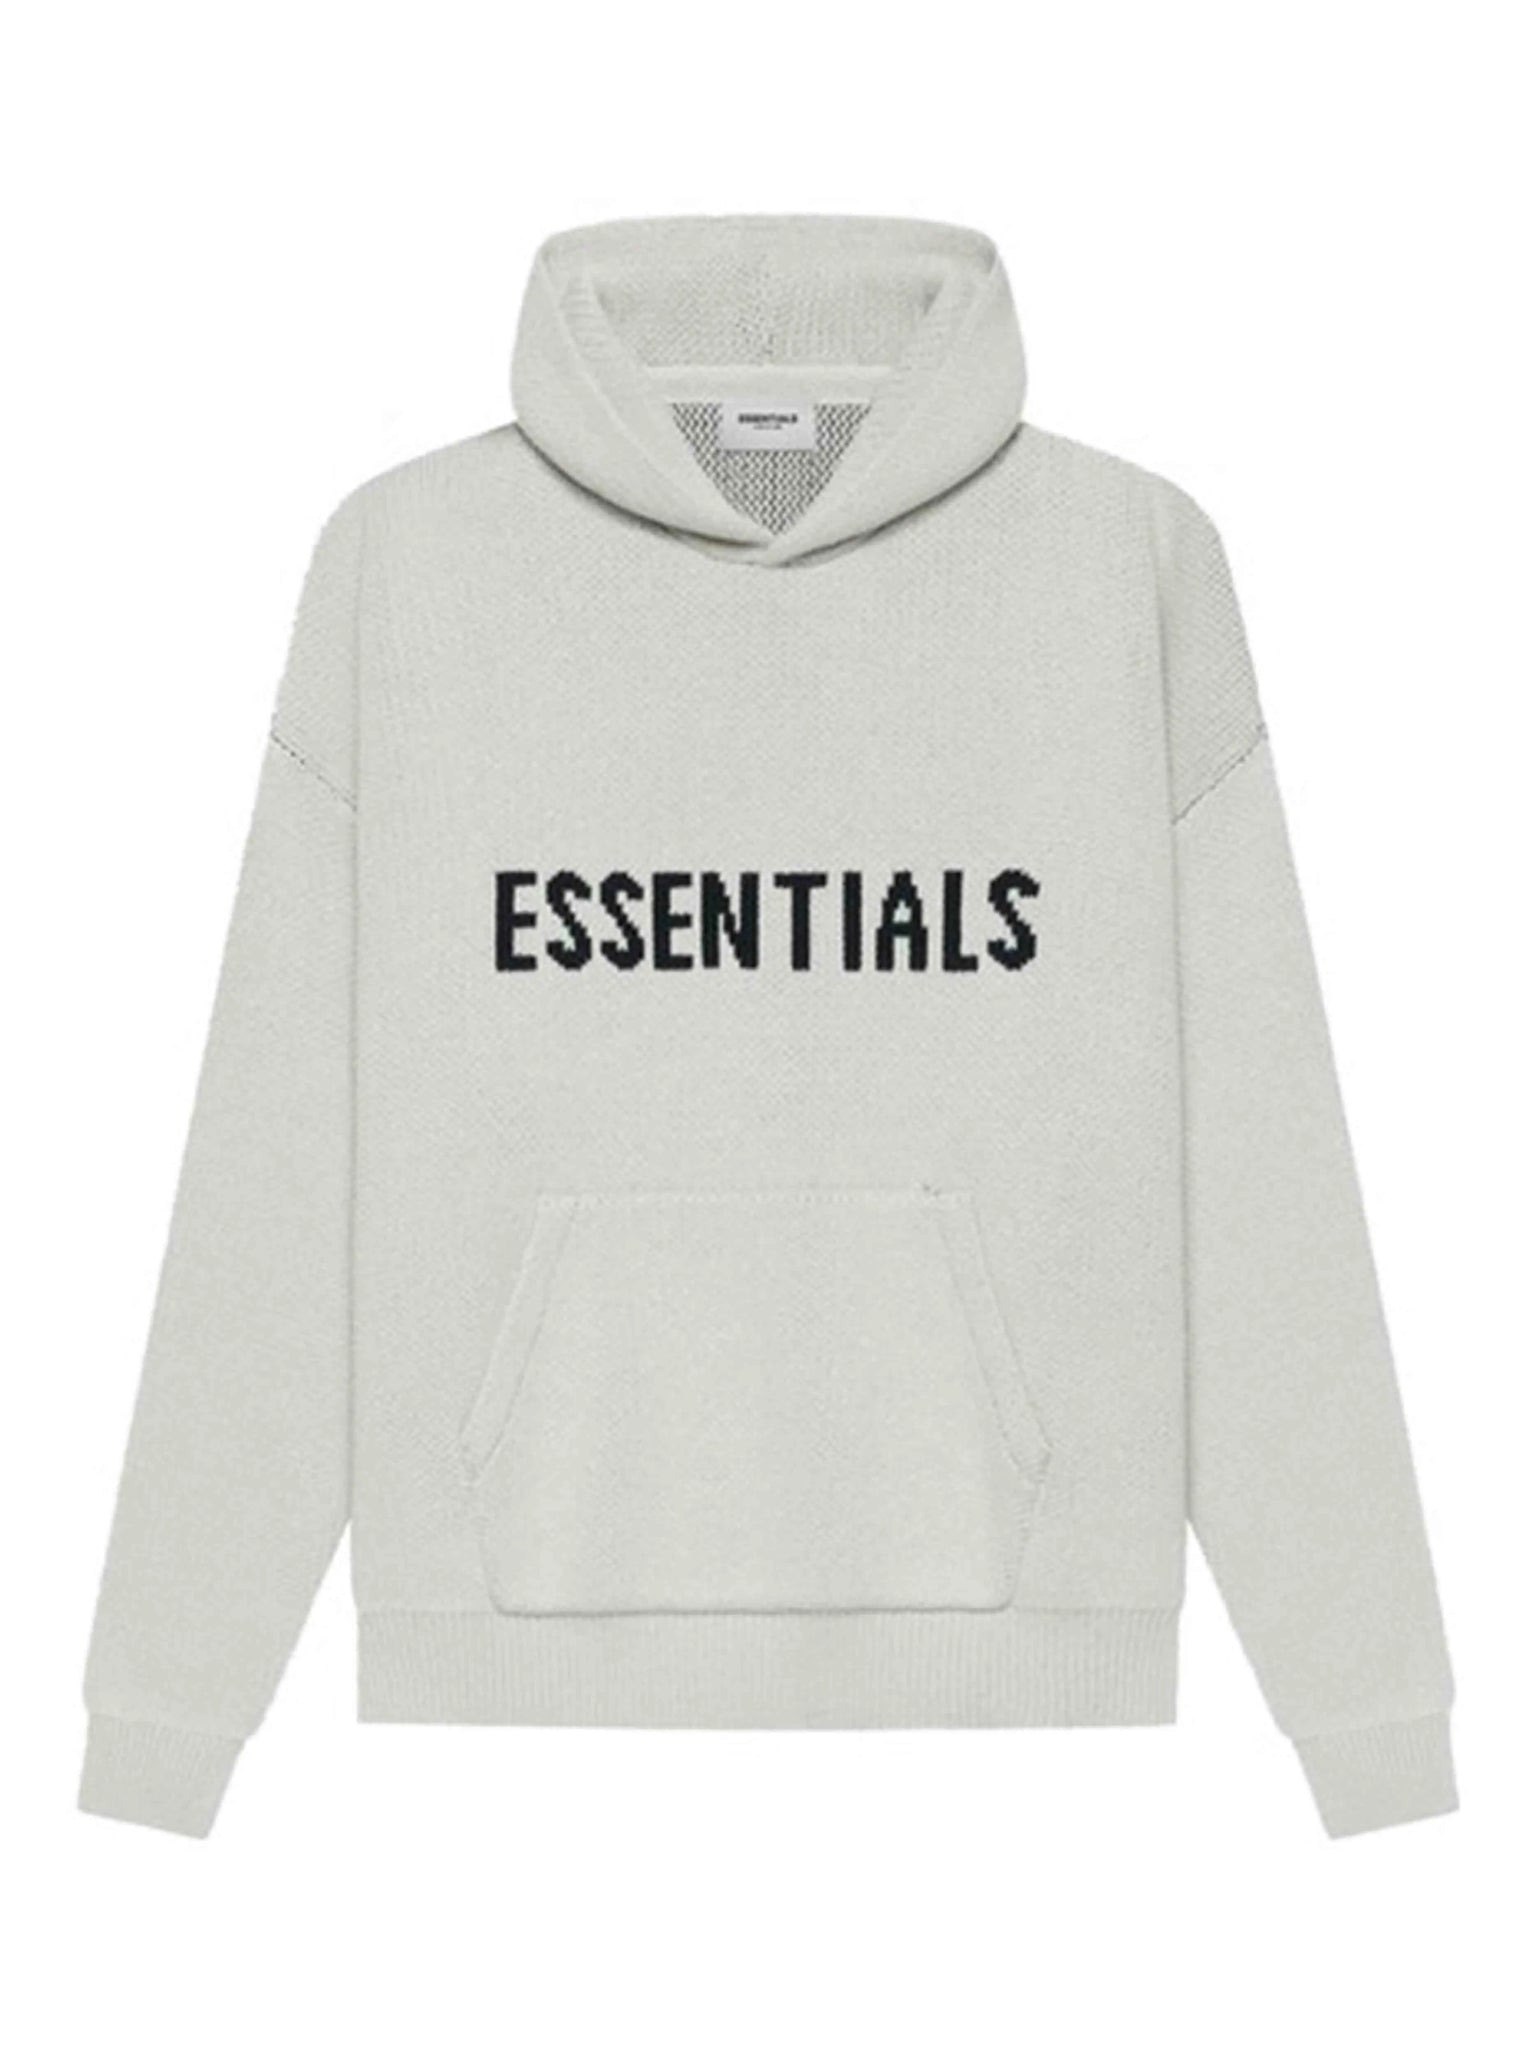 Fear Of God Essentials Knit Pullover Hoodie Light Heather Oatmeal [SS21] Prior